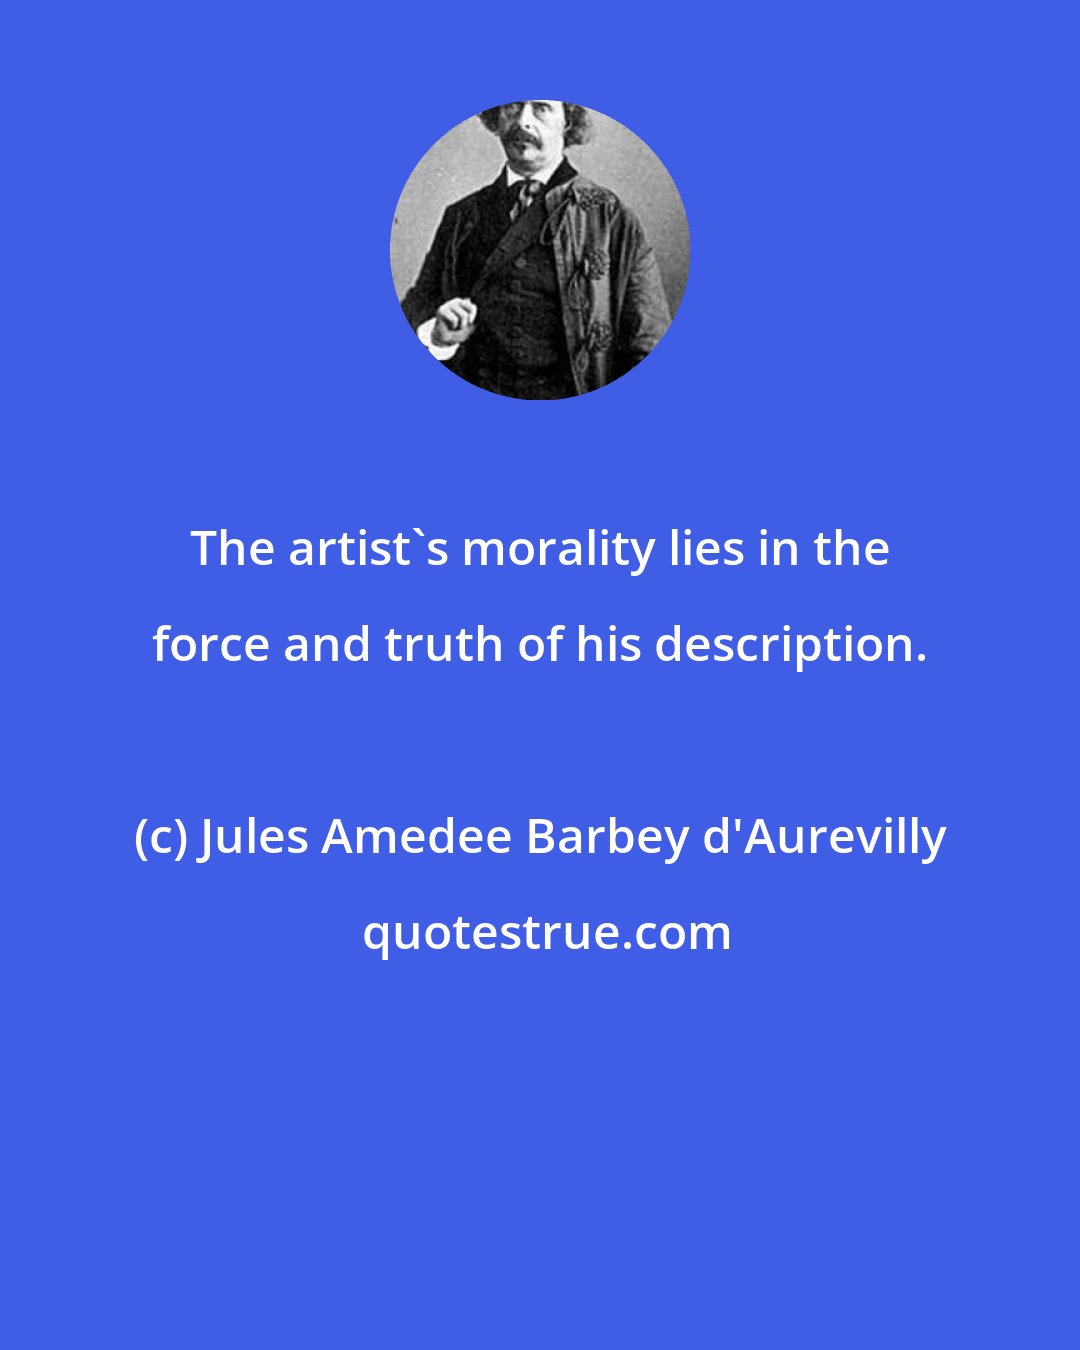 Jules Amedee Barbey d'Aurevilly: The artist's morality lies in the force and truth of his description.